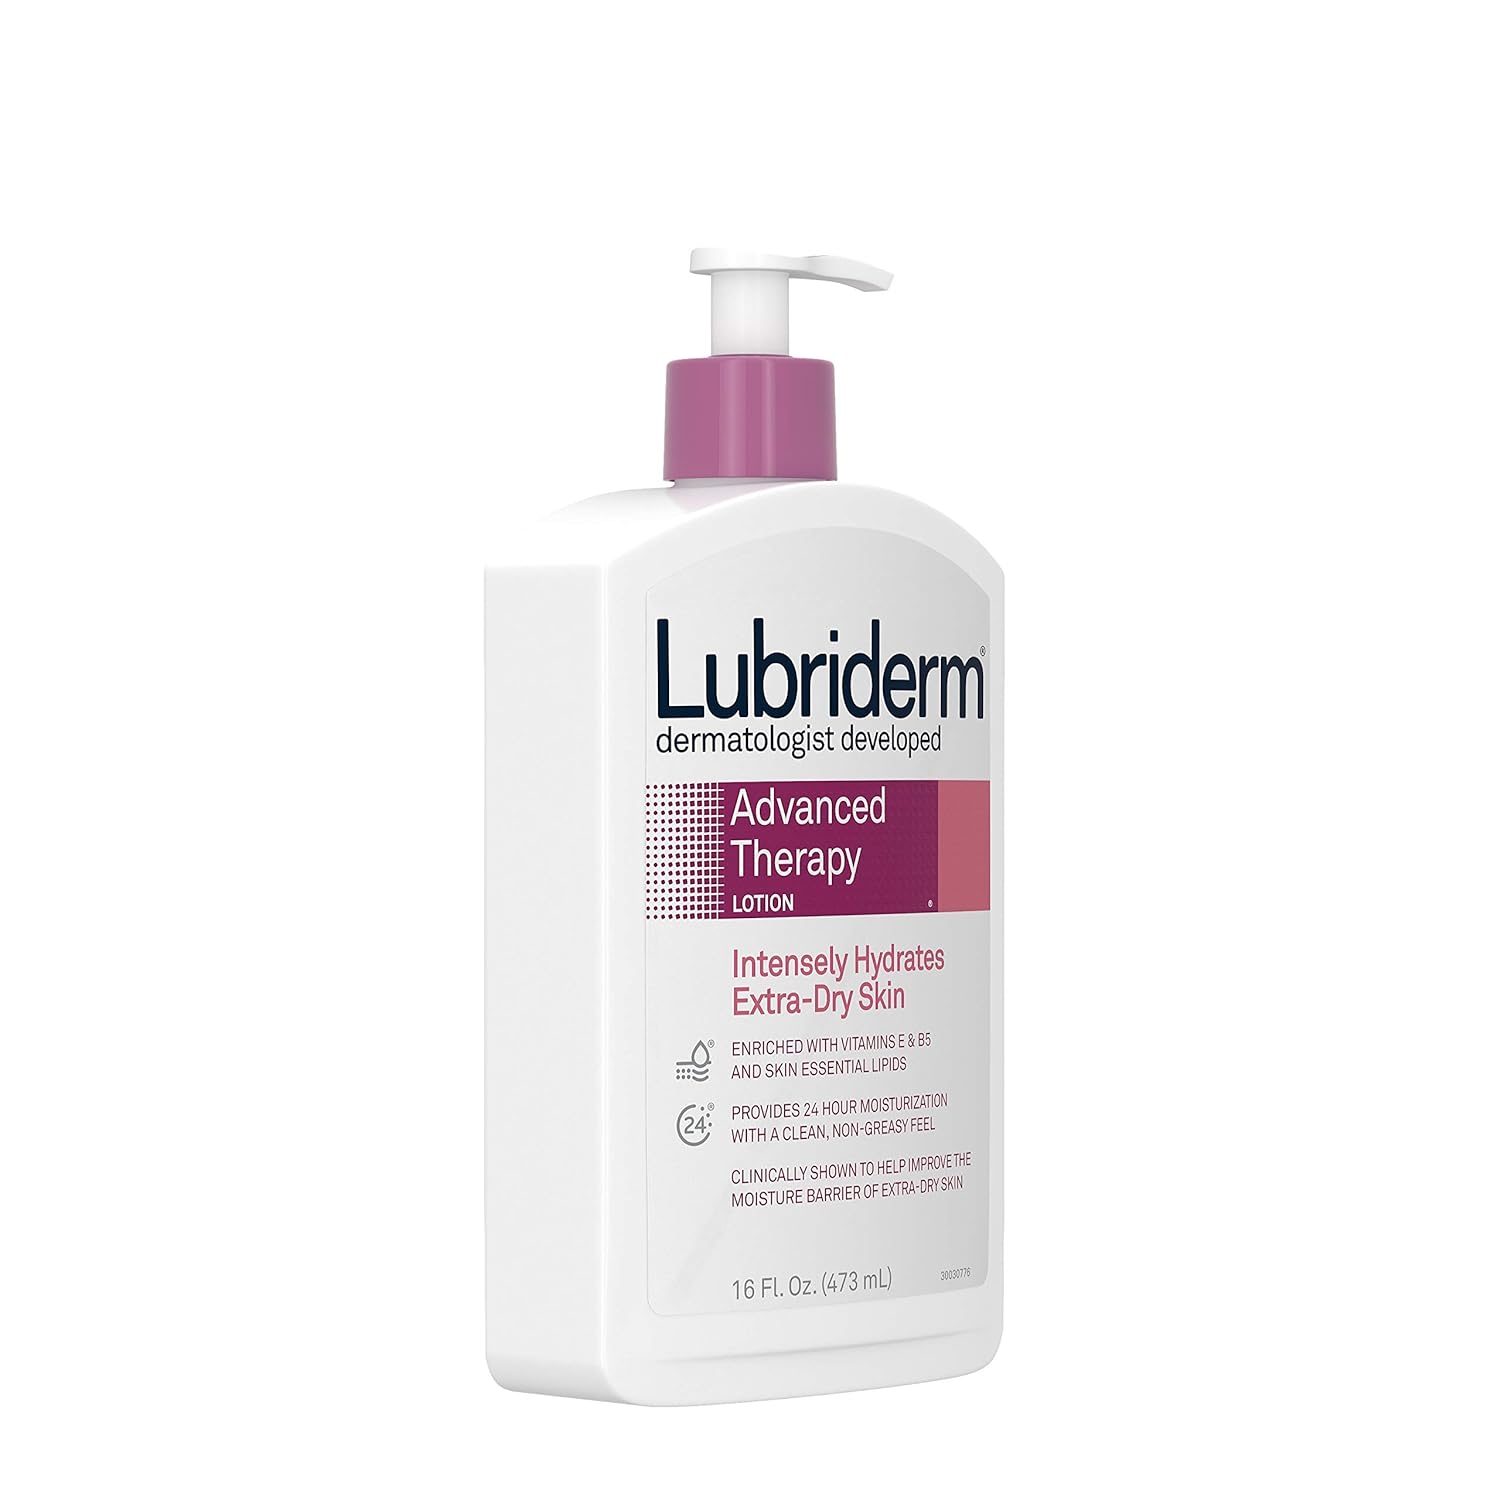 Lubriderm Advanced Therapy Fragrance-Free Moisturizing Lotion with Vitamins E and Pro-Vitamin B5, Intense Hydration for Extra Dry Skin, Non-Greasy Formula, Pack of Three, 3 x 16 fl. oz : Beauty & Personal Care